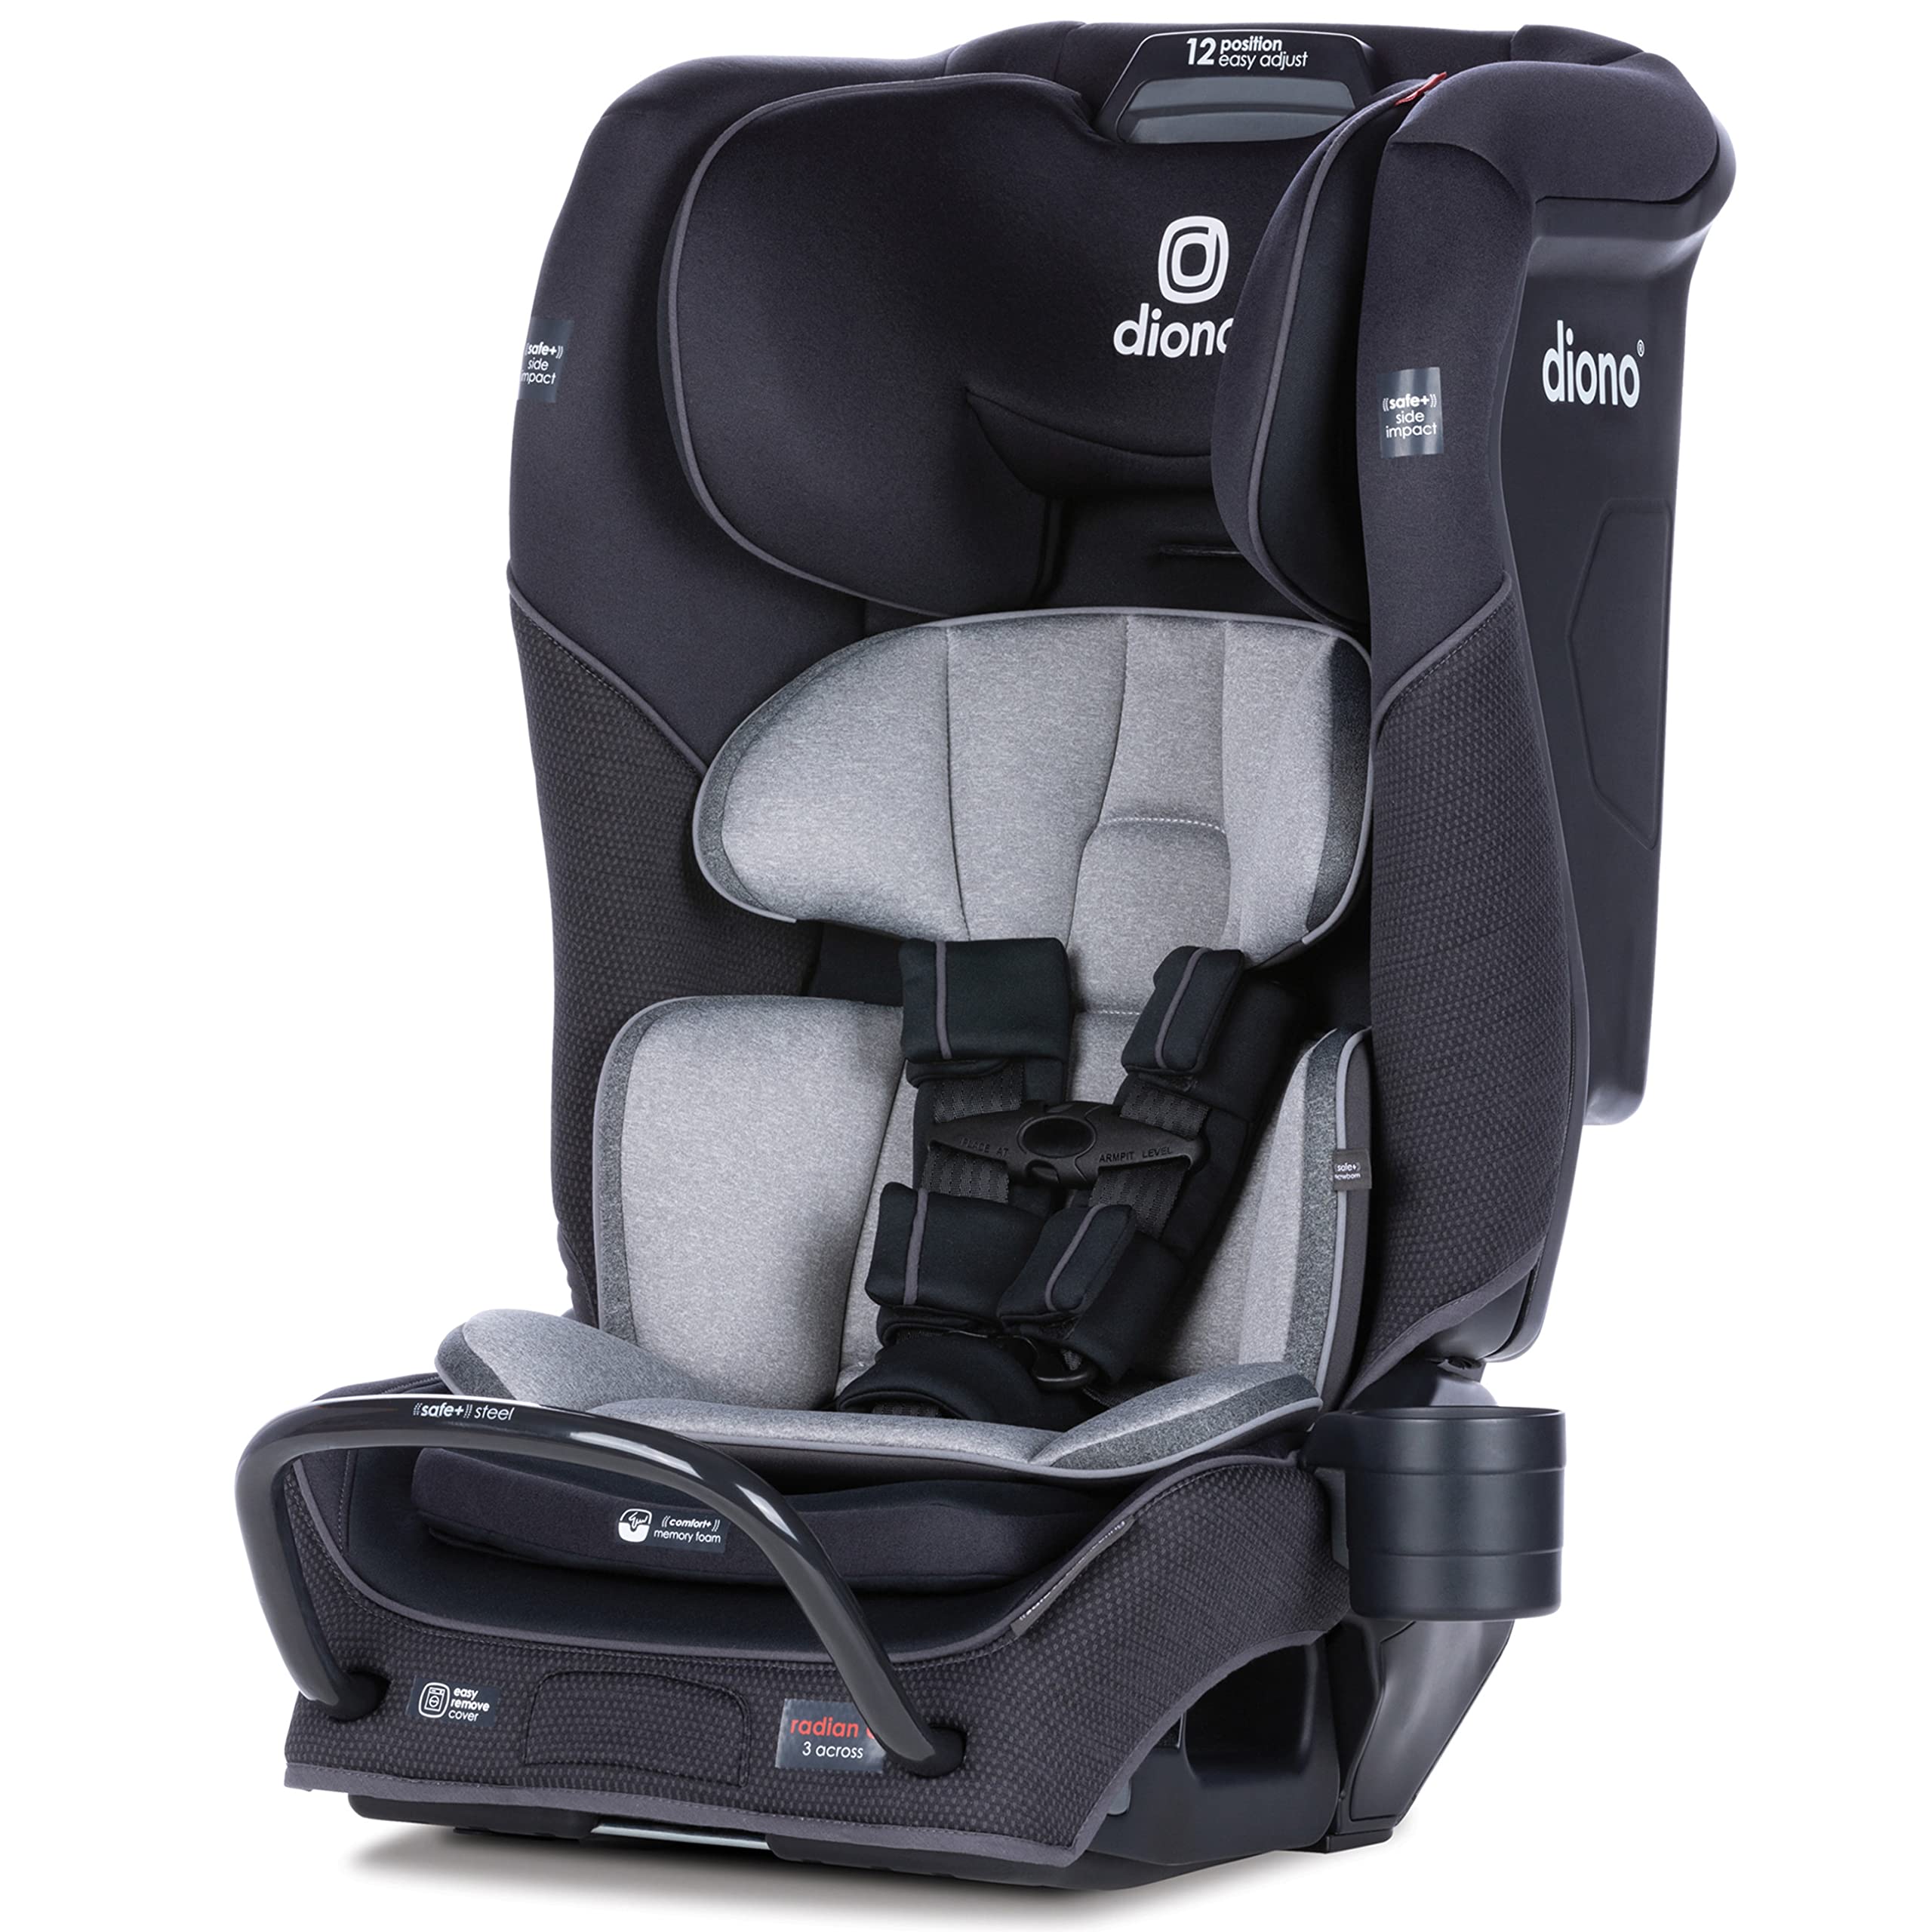 Diono Radian 3QX 4-in-1 Rear & Forward Facing Convertible Car Seat, Safe+ Engineering 3 Stage Infant Protection, 10 Years 1 Car Seat, Ultimate Protection, Slim Fit 3 Across $199.99